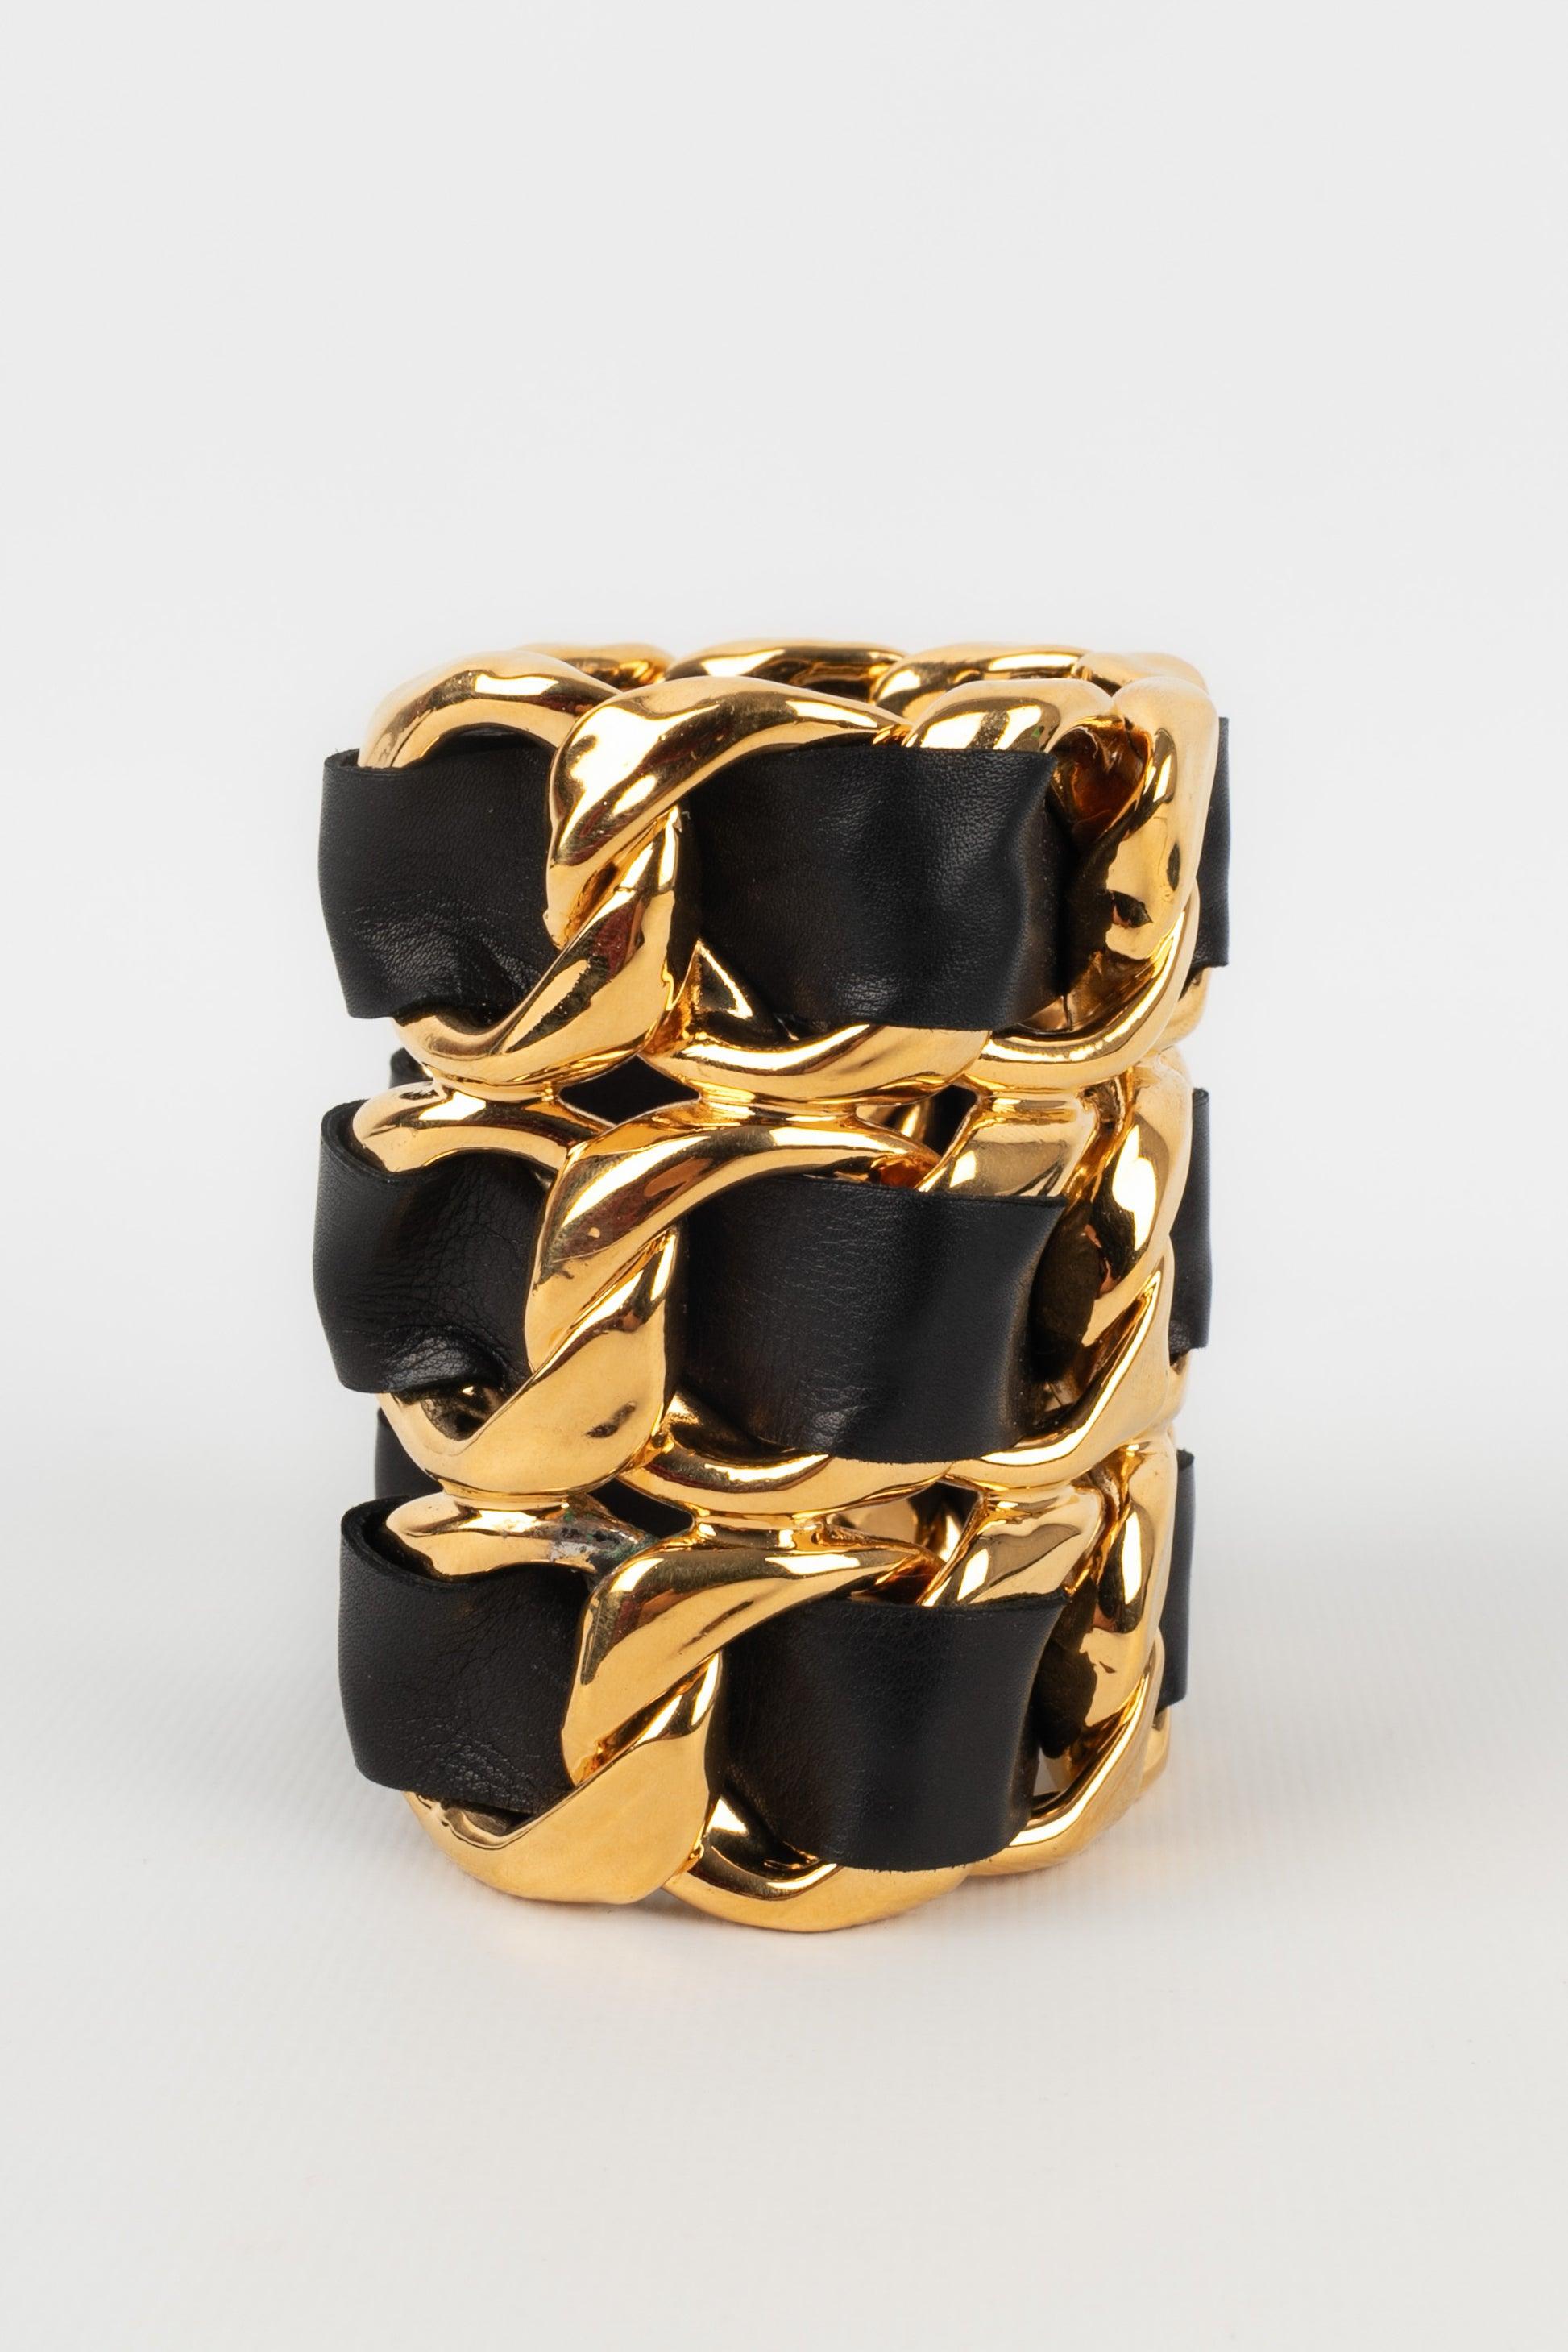 Chanel Cuff Bracelet in Golden Metal with Black Leather, 1980s For Sale 1